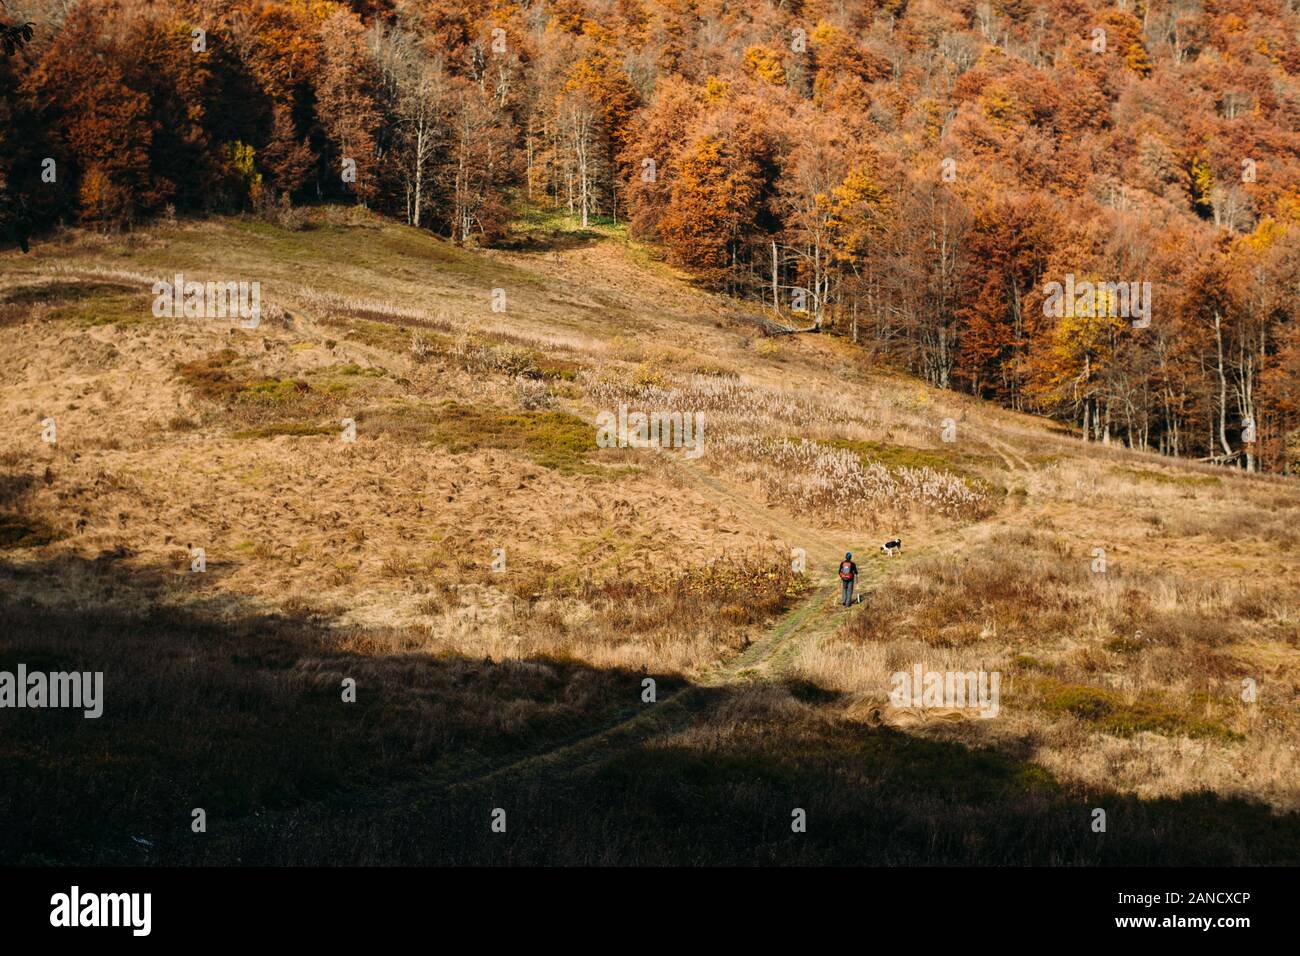 Man and dog hiking through big field with autumn forest around Stock Photo